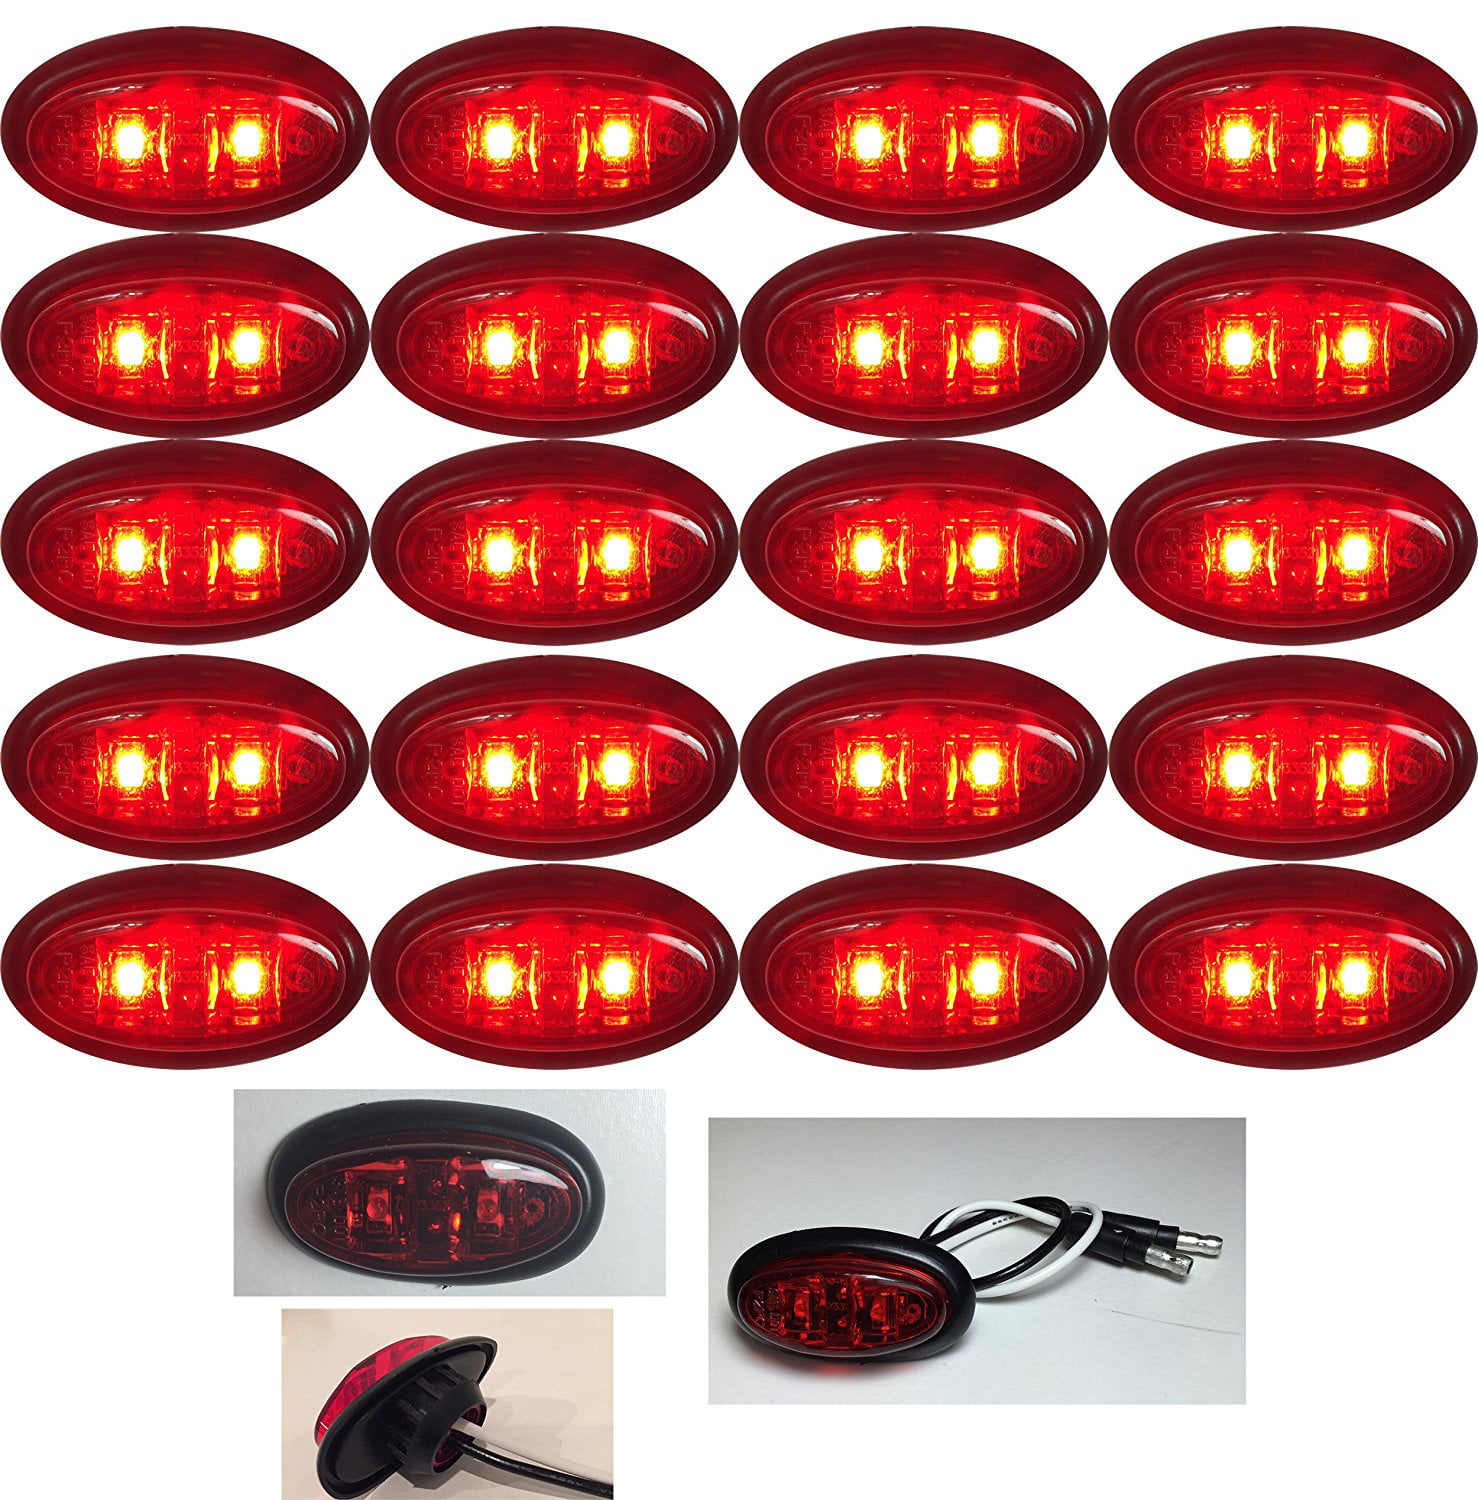 12V LONG HAUL Red/Red Mini Oval 2 Diode 2 X 3/4 .75 Clearance Marker Trailer Truck Lights Stainless Steel Trim 5 Pack 